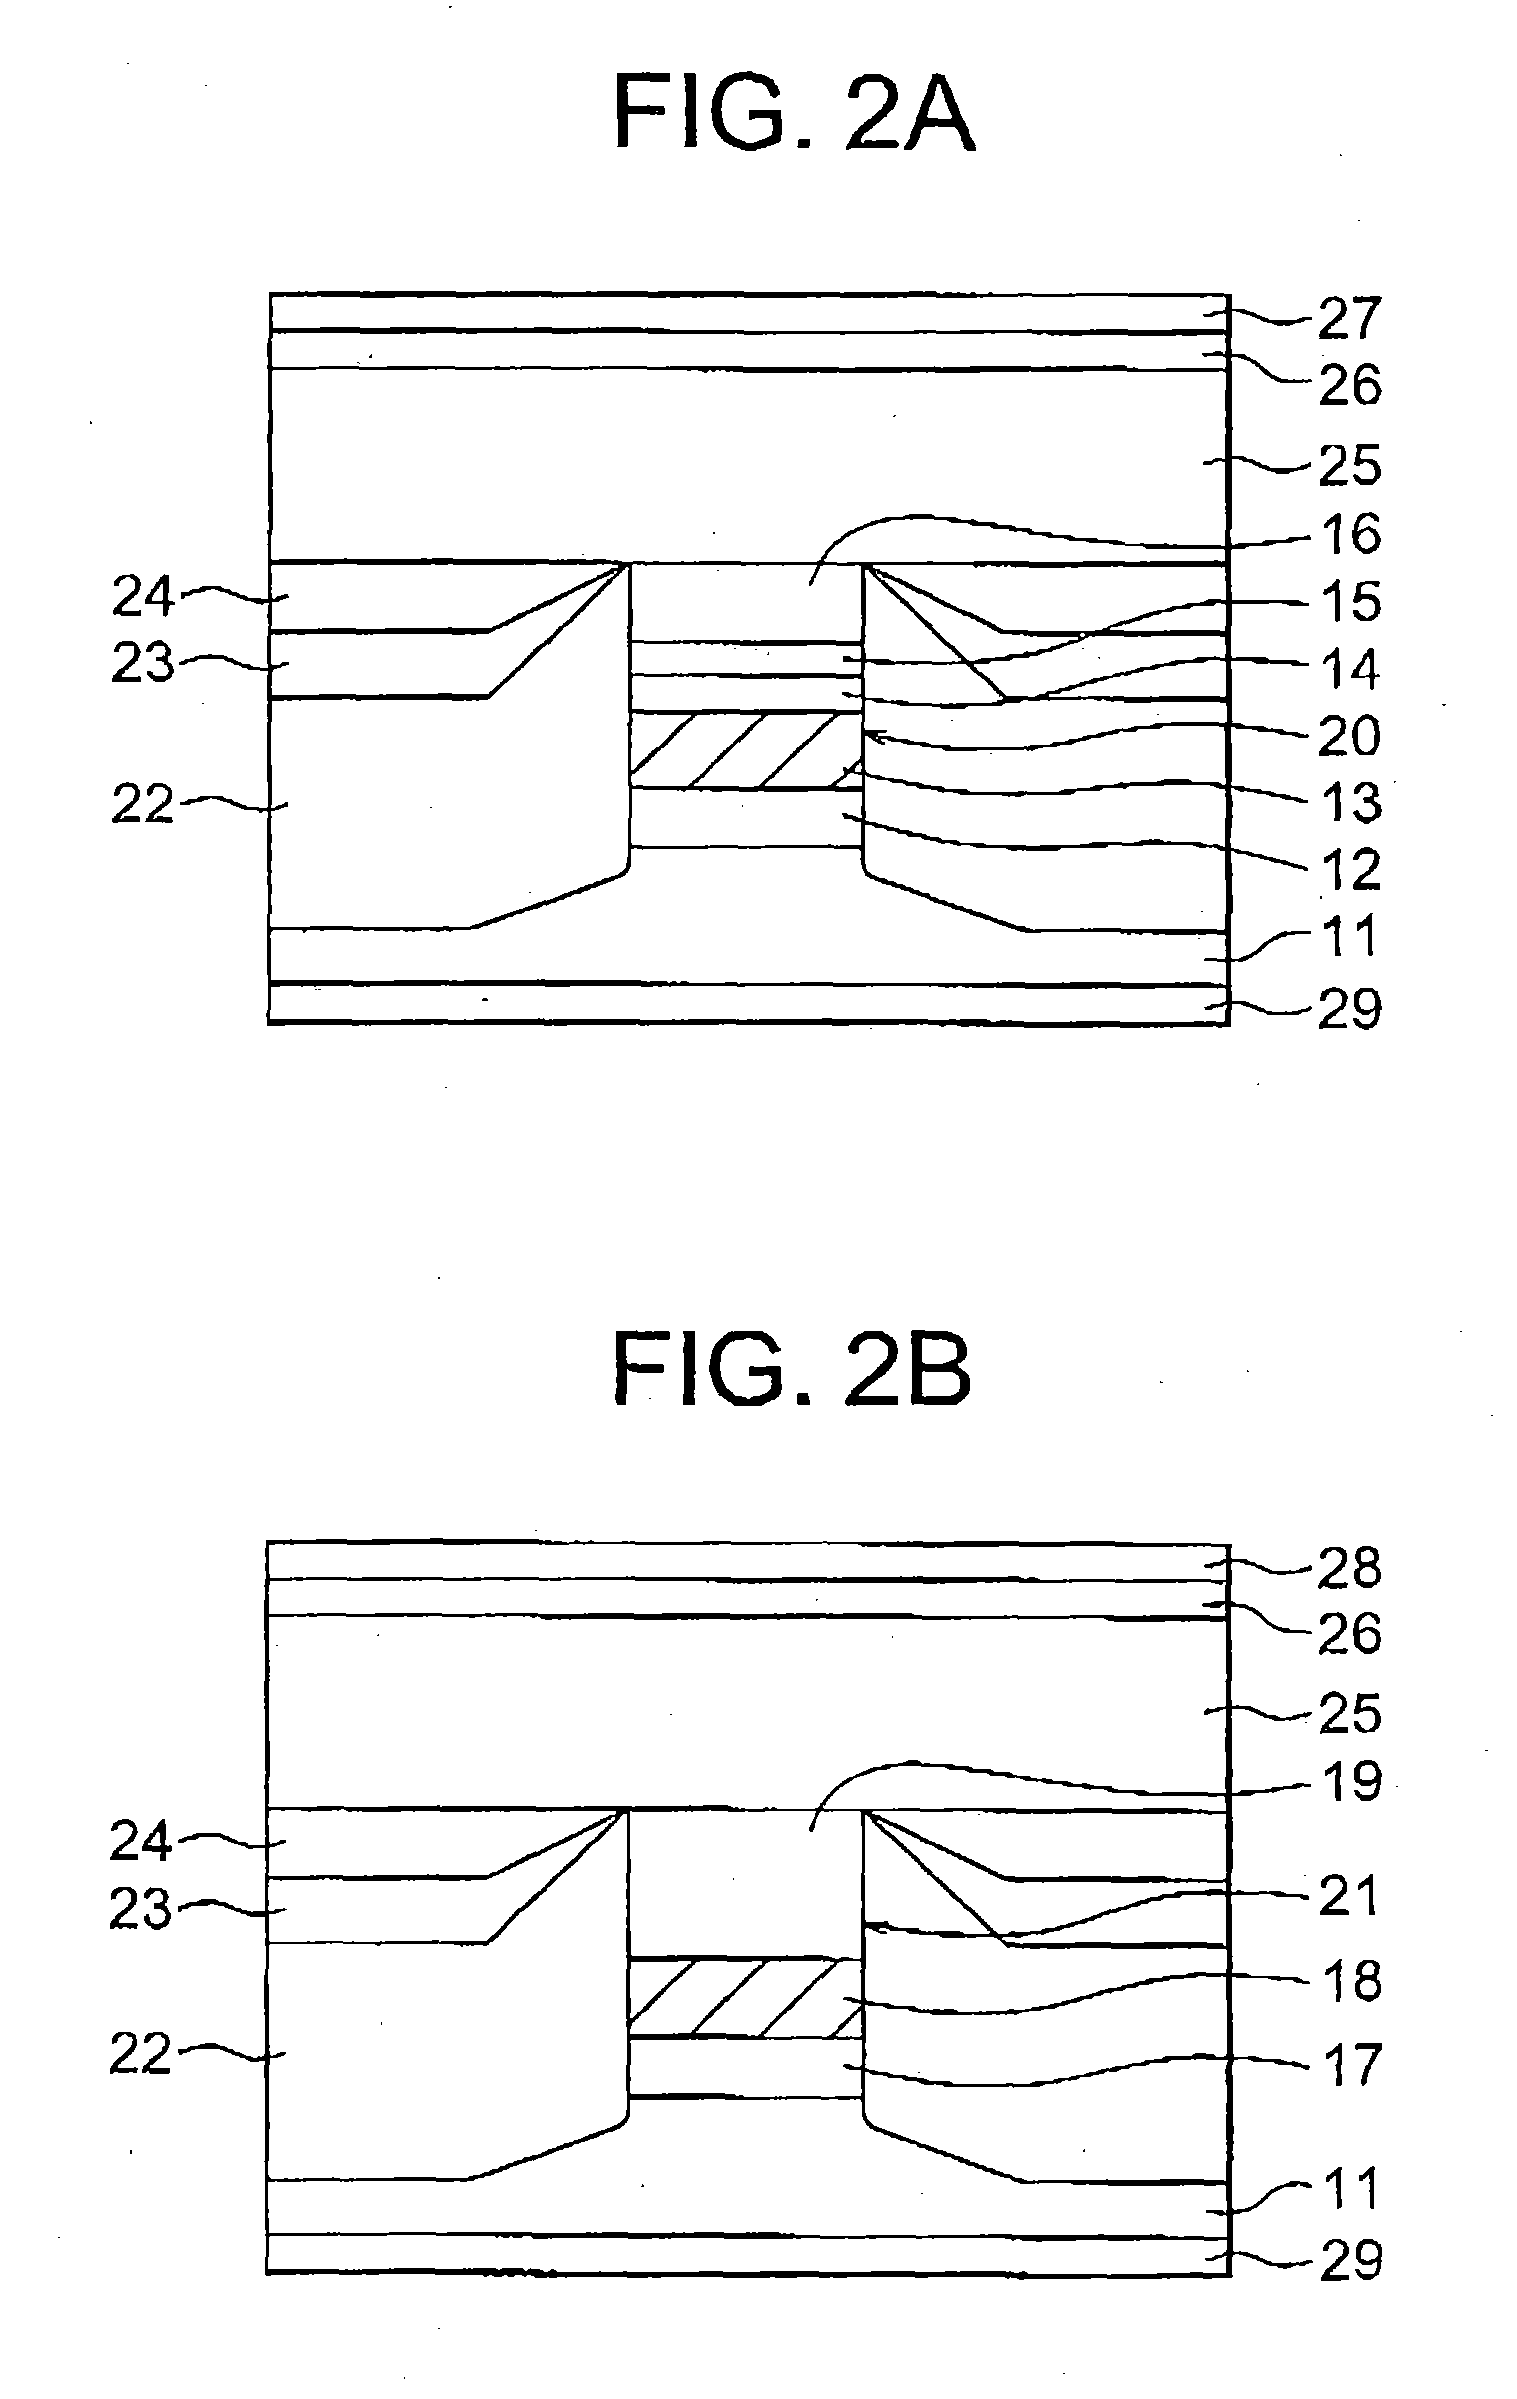 Optical device having a carrier-depleted layer